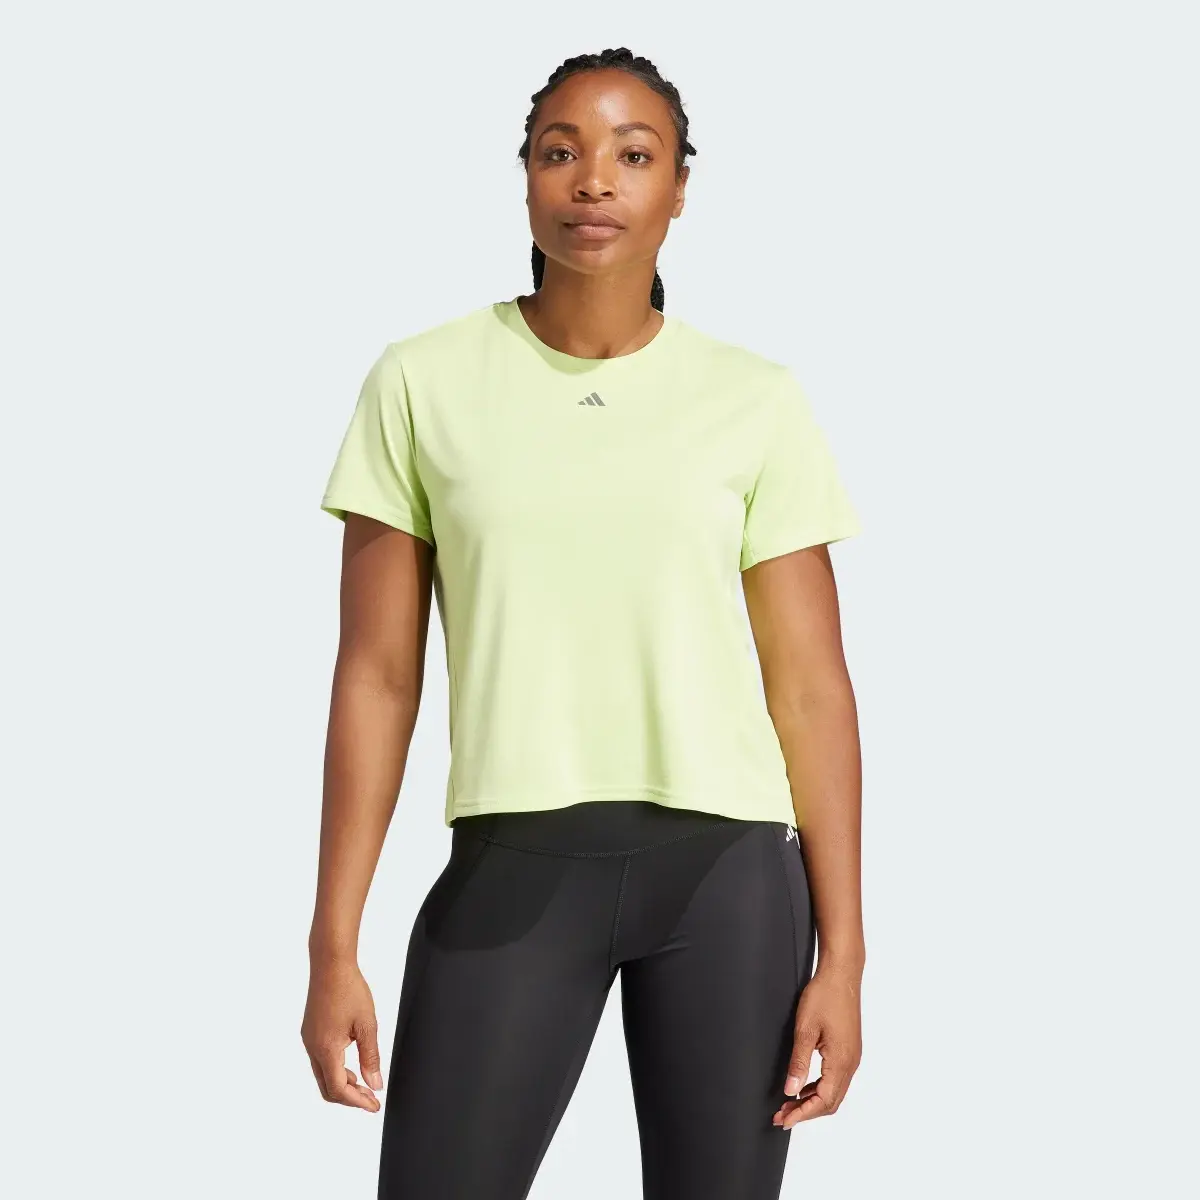 Adidas HIIT HEAT.RDY Sweat-Conceal Training T-Shirt. 2